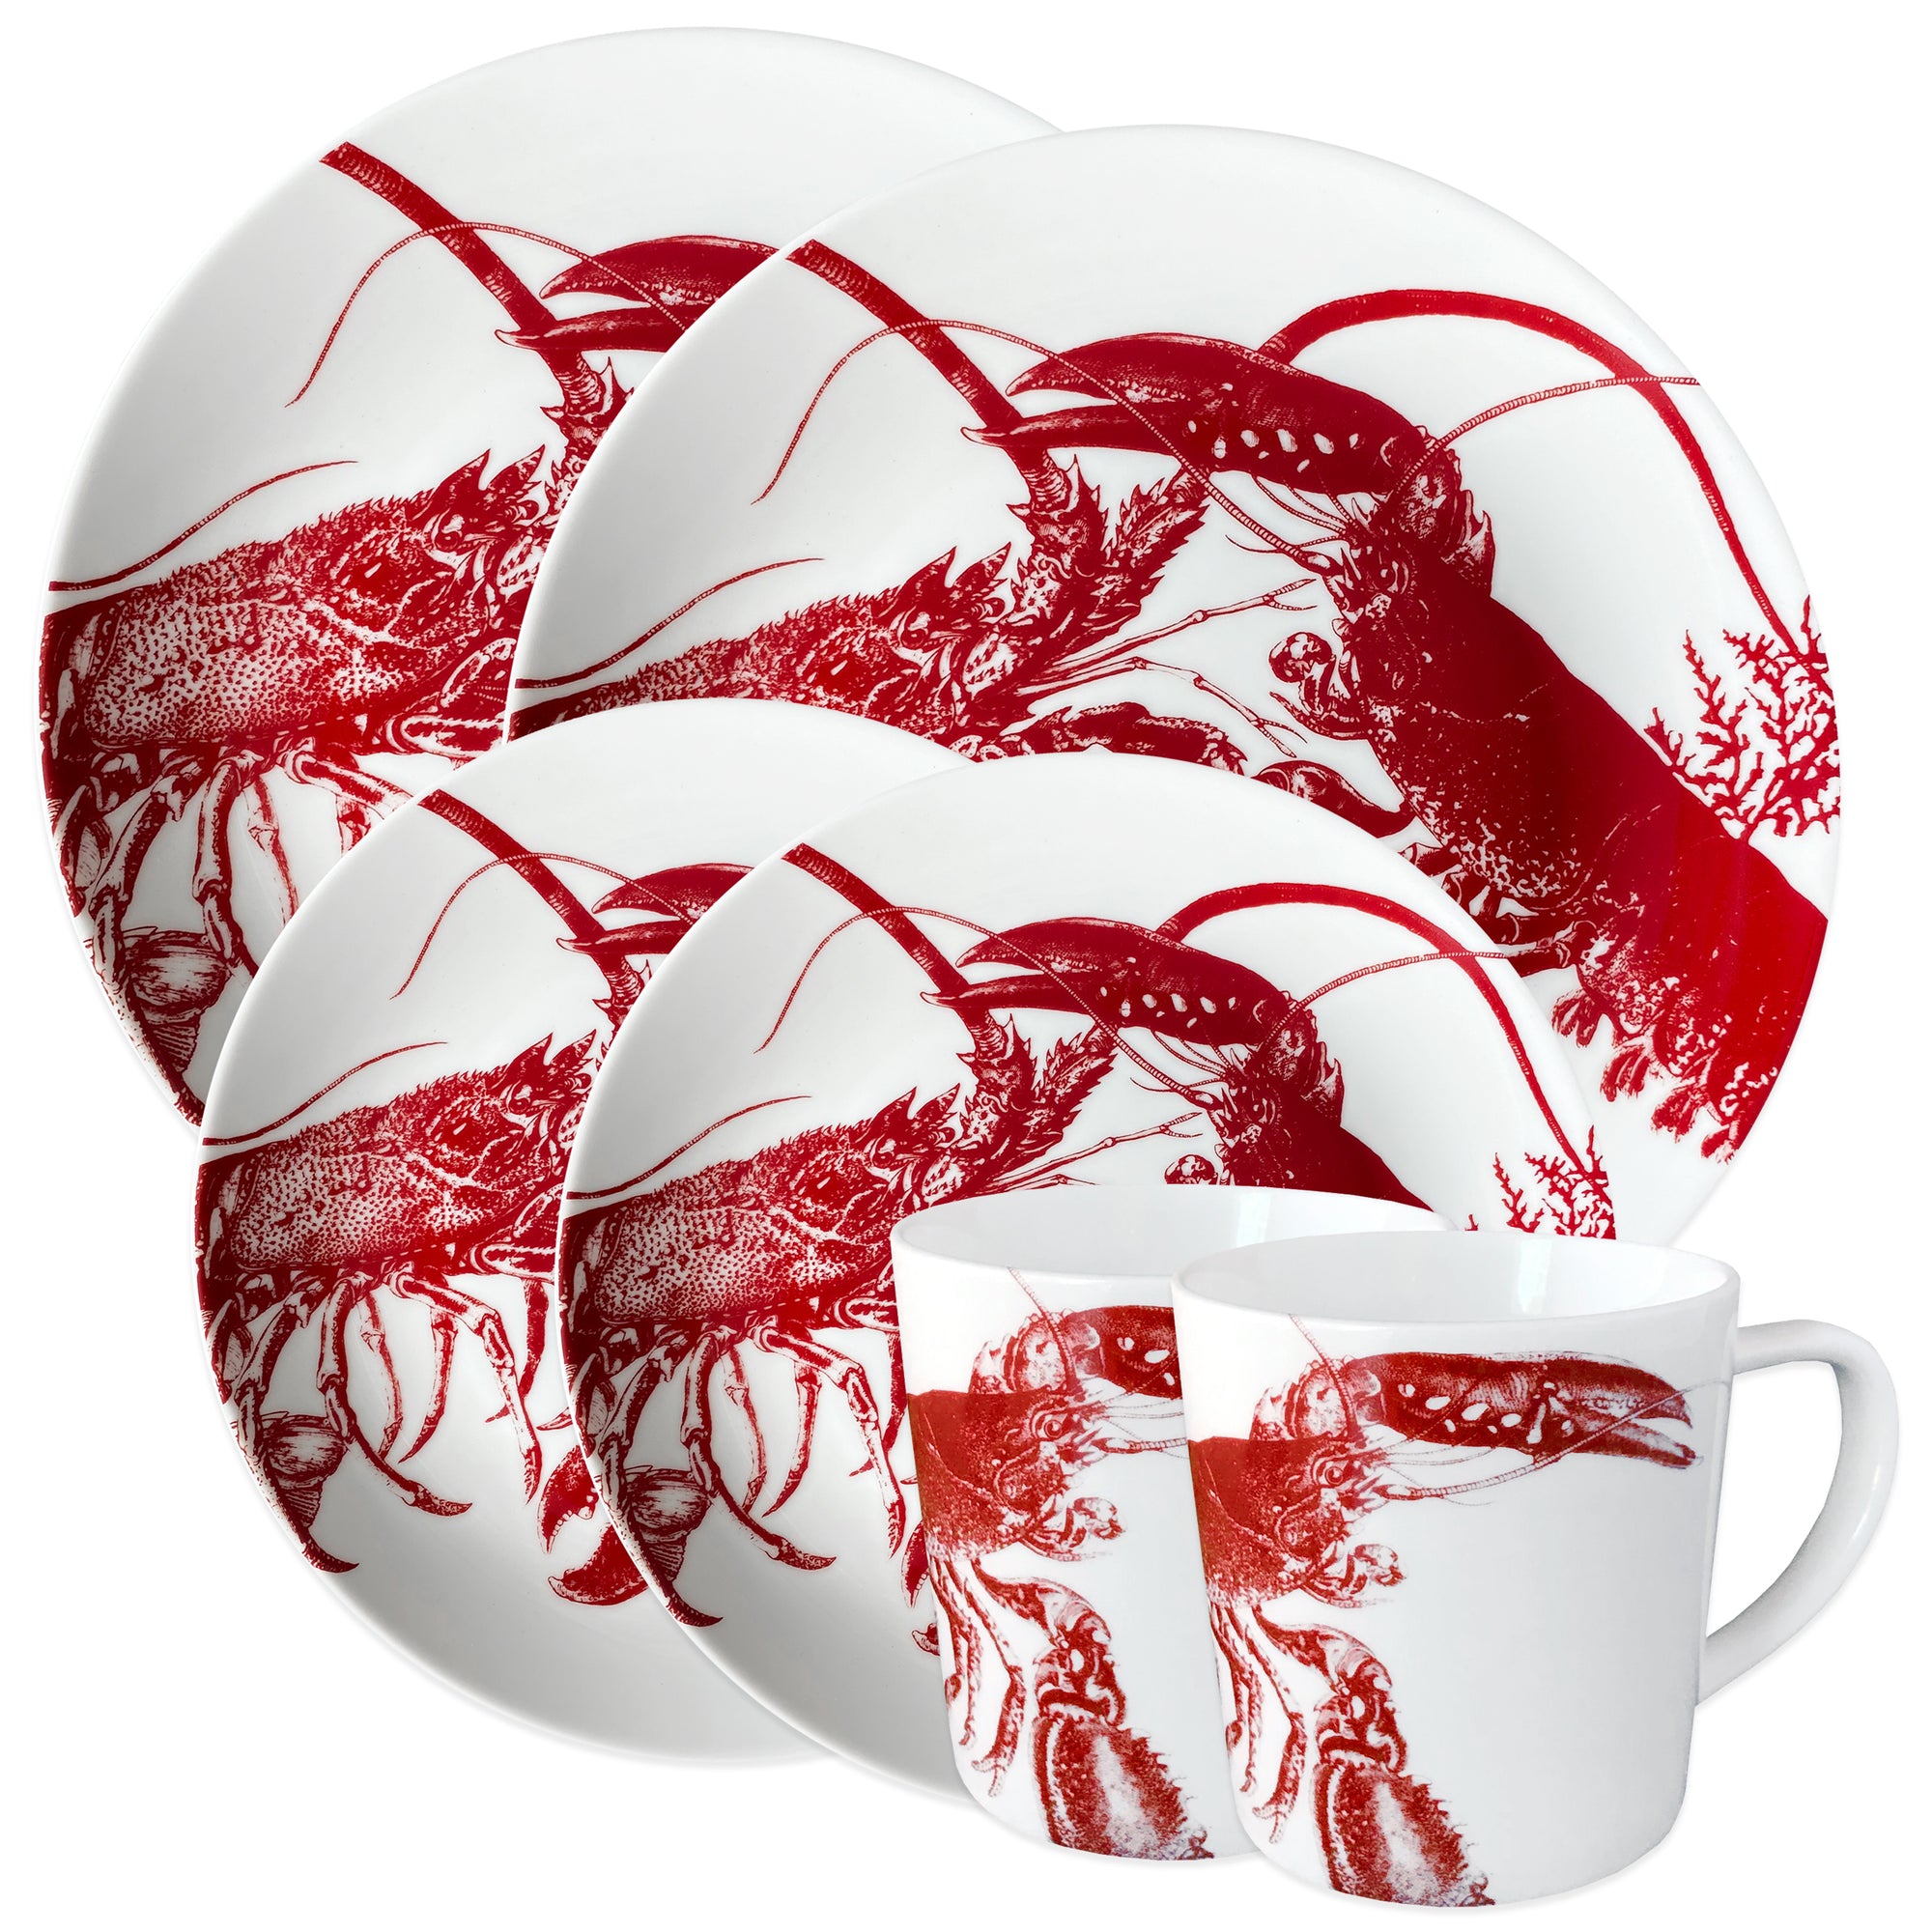 Lobster Red and White Porcelain Dinnerware set for 2 with 2 Dinner Plates, 2 Salad Plates, and 2 Mugs from Caskata